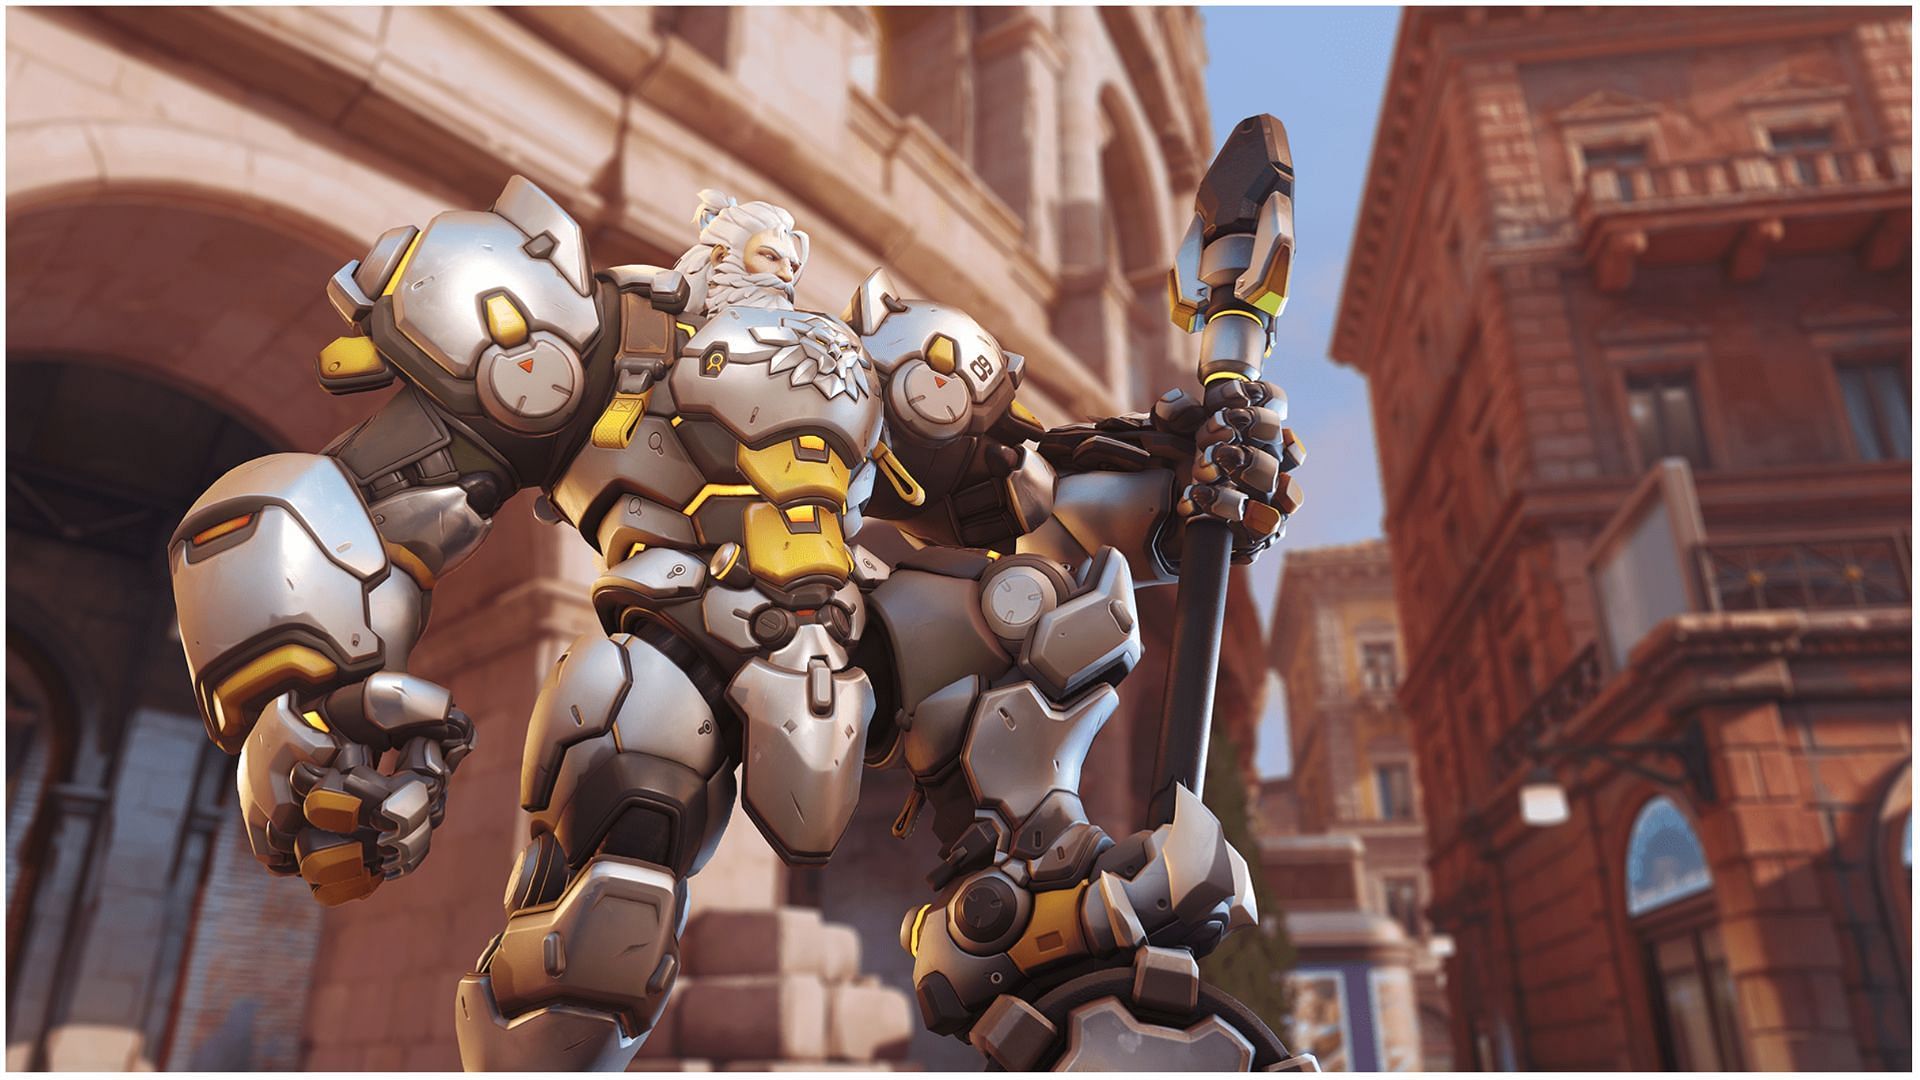 Reinhardt is a tank character in Overwatch 2 (Image via Activision Blizzard)